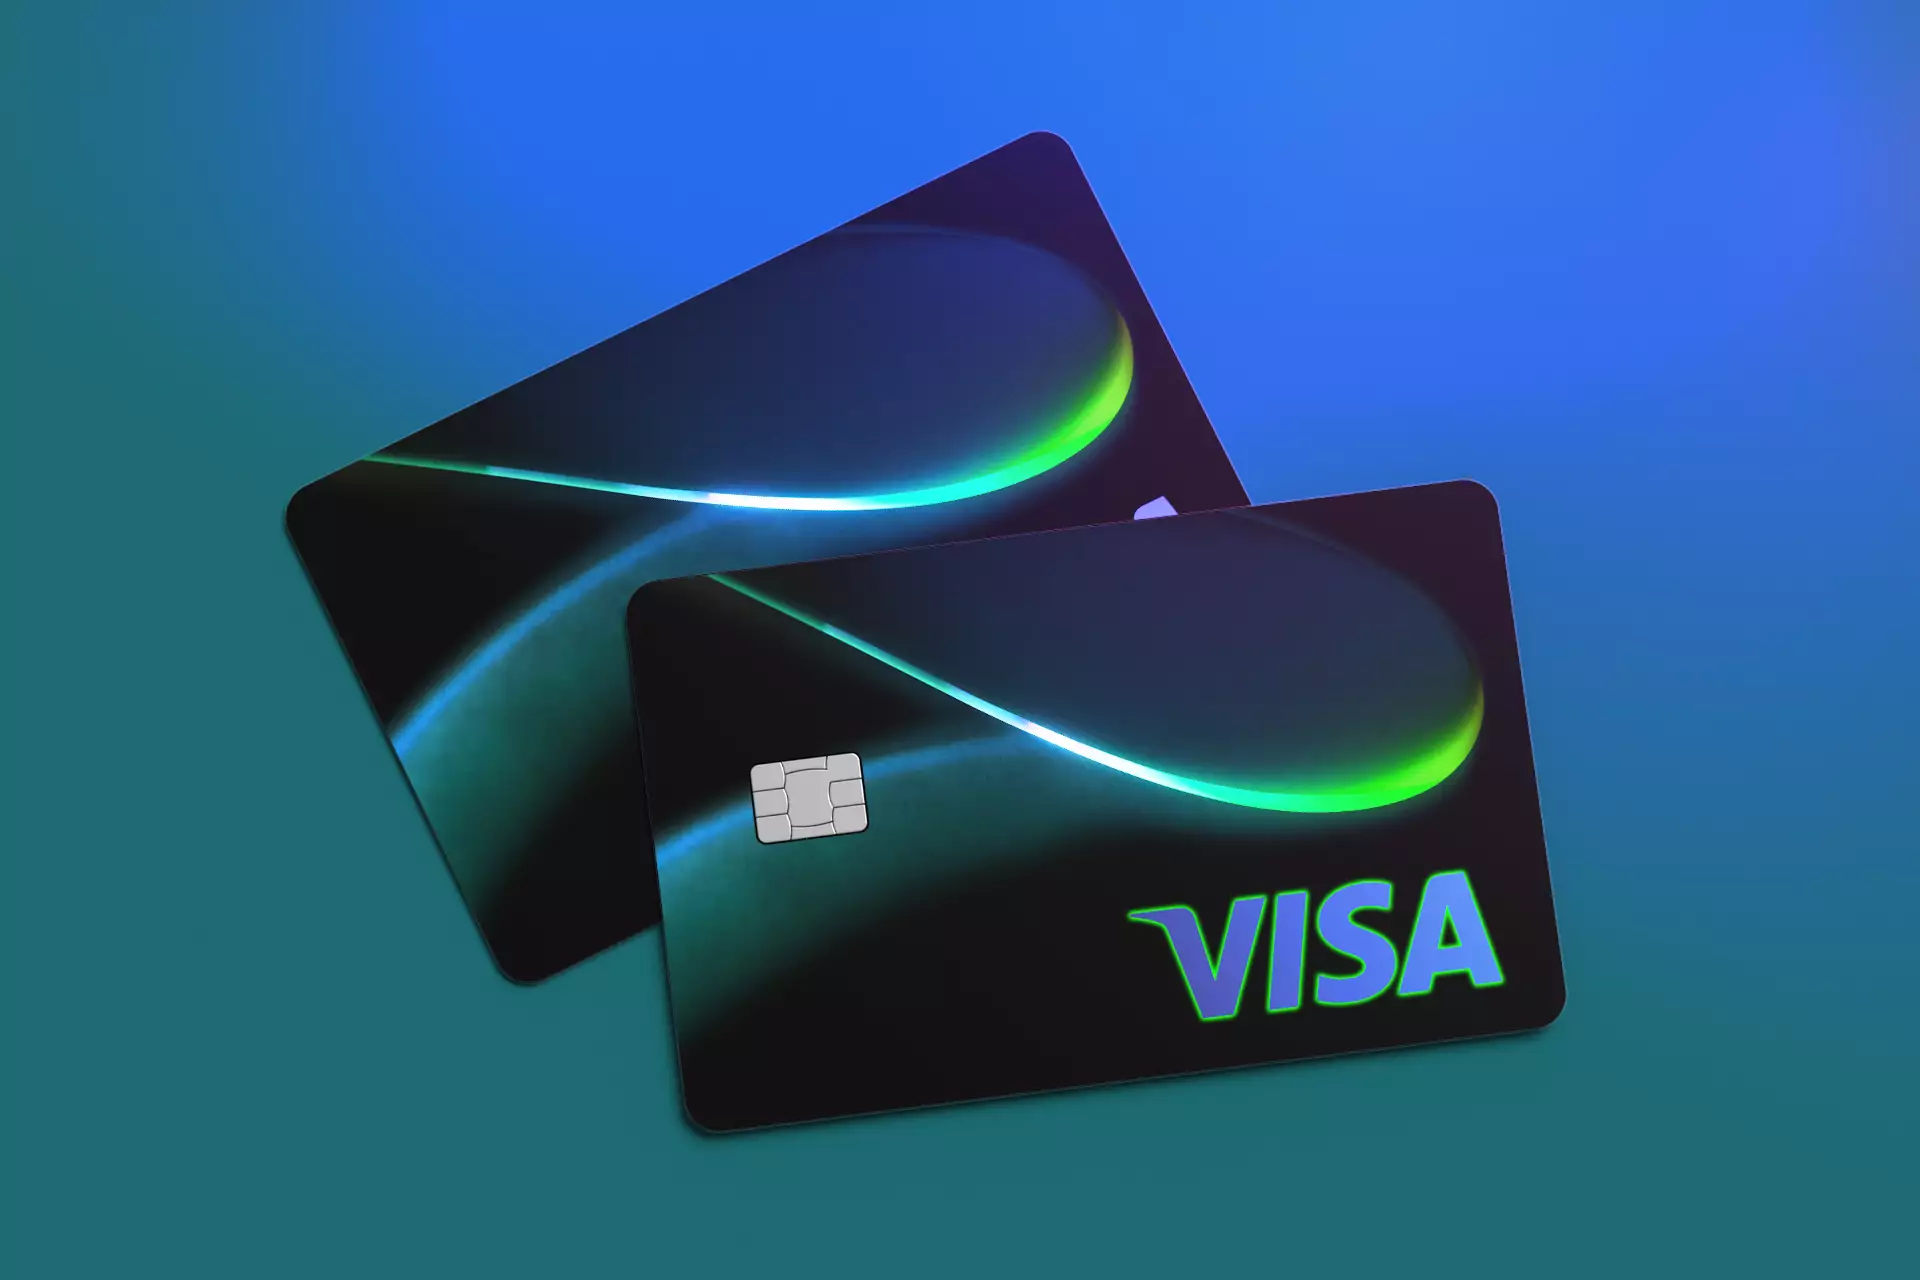 Visa is one of the most popular and trustworthy payment systems.